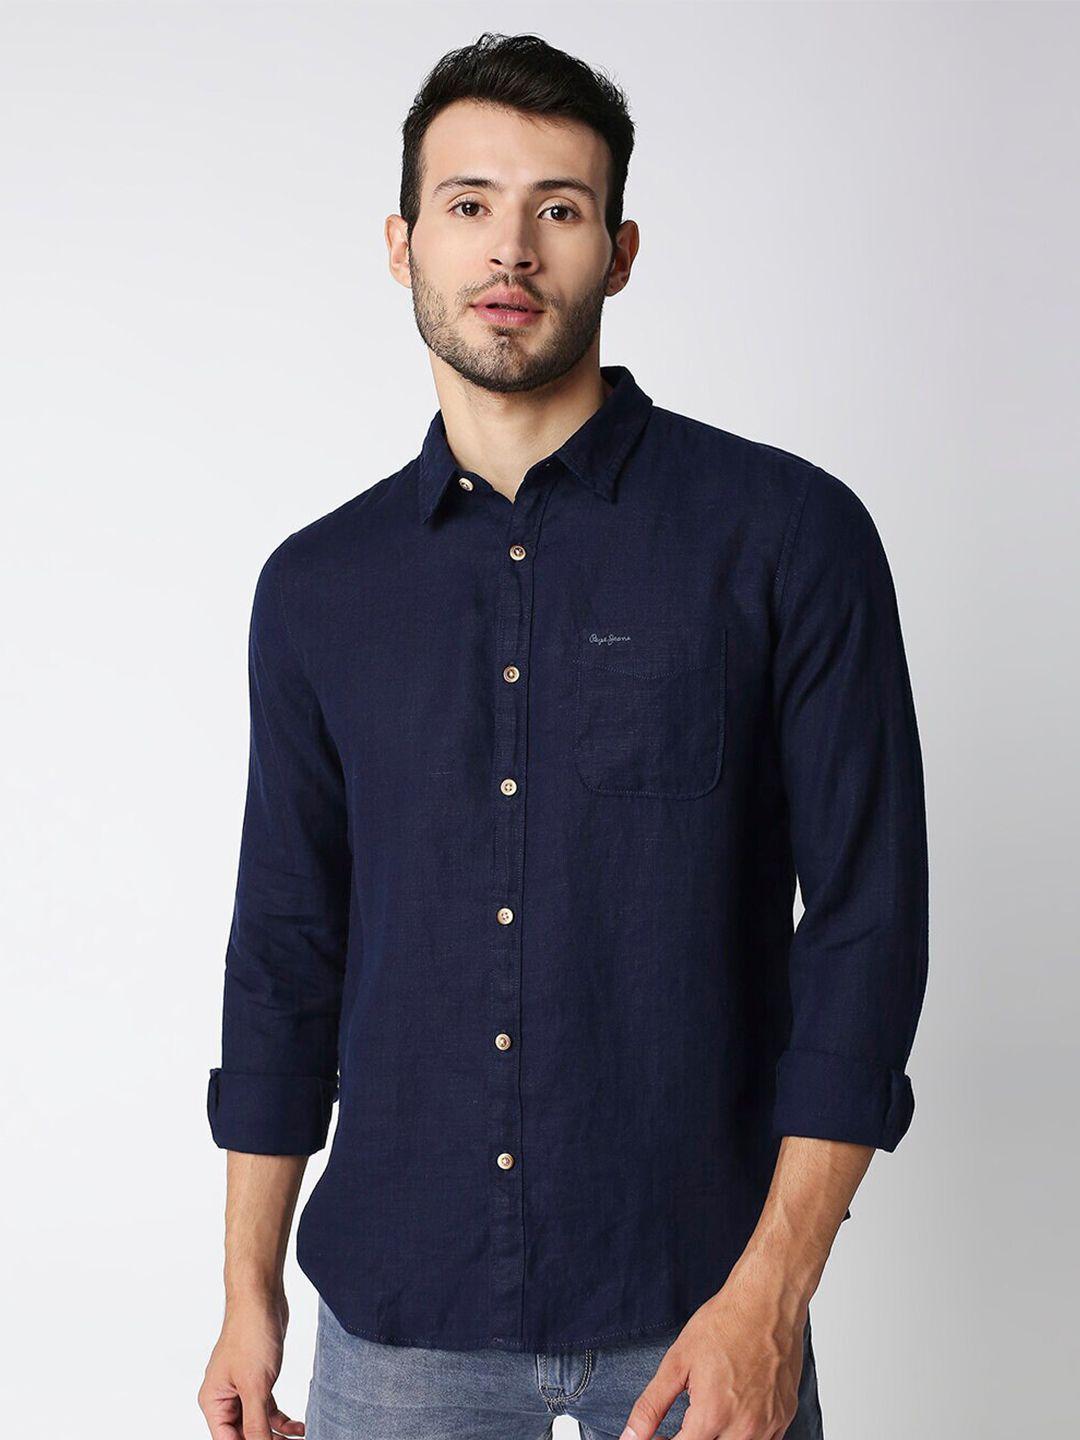 pepe jeans men navy blue solid casual shirt